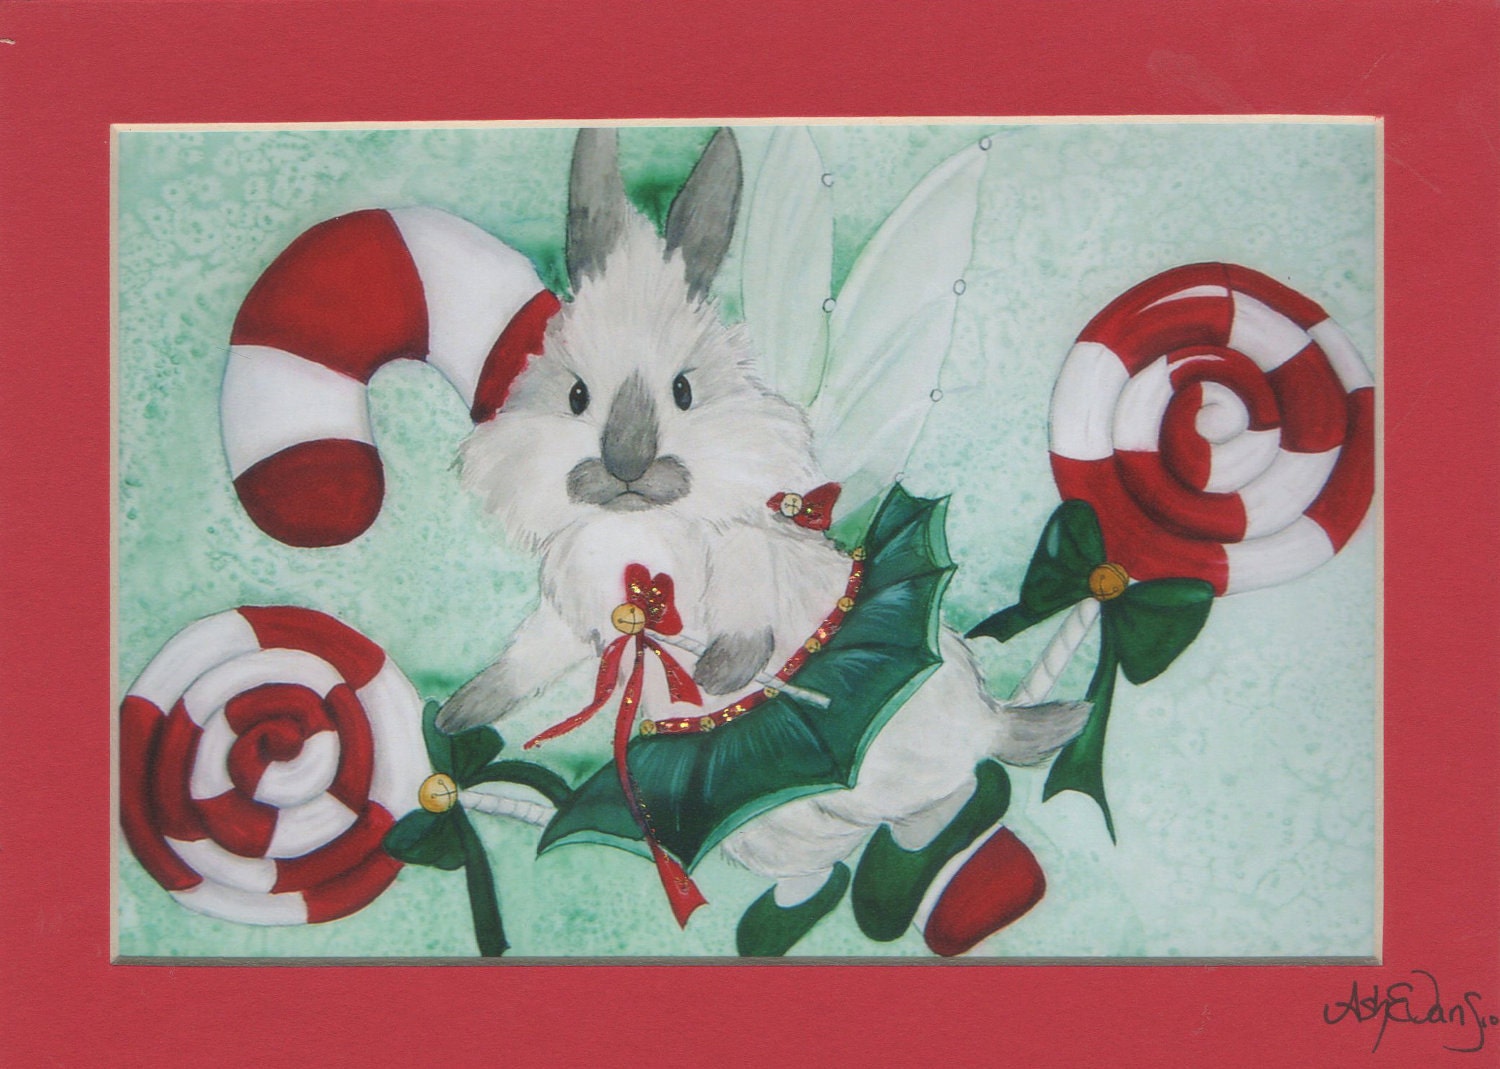 Fairy rabbit fantasy art  5x7 matted print signed by artist